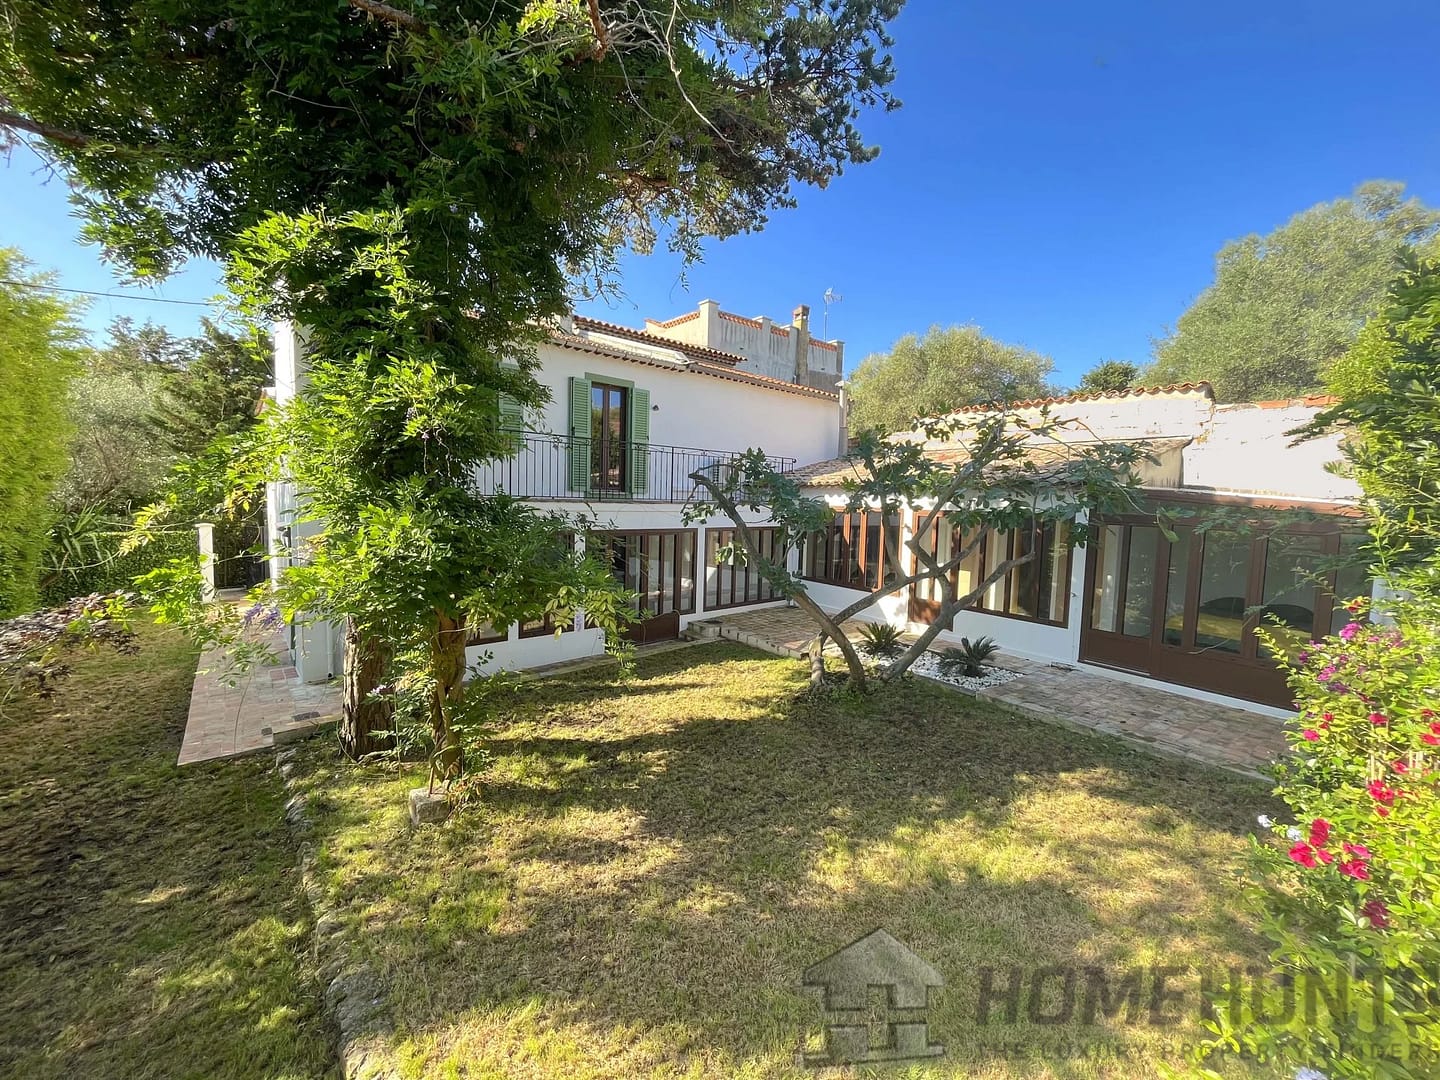 Villa/House For Sale in Antibes 14